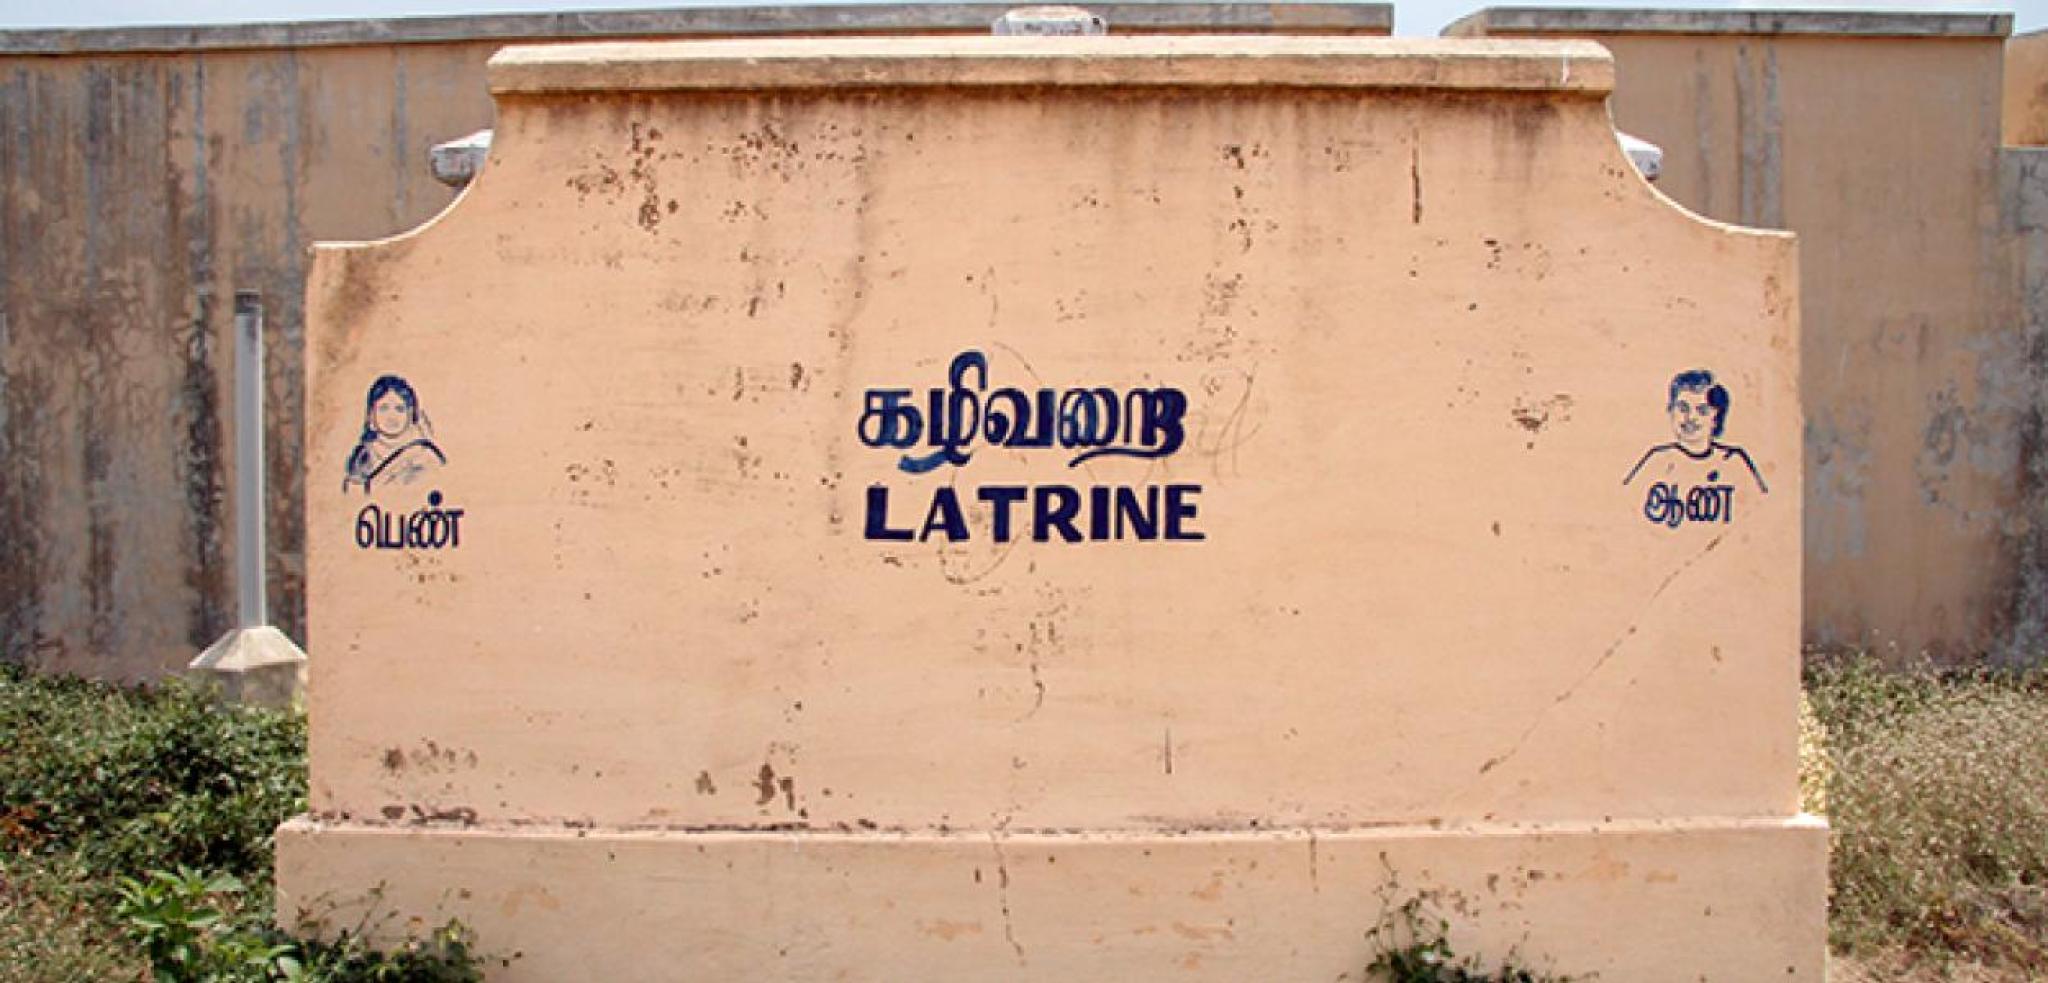 Outside wall of a concrete toilet building with Latrine written on the side